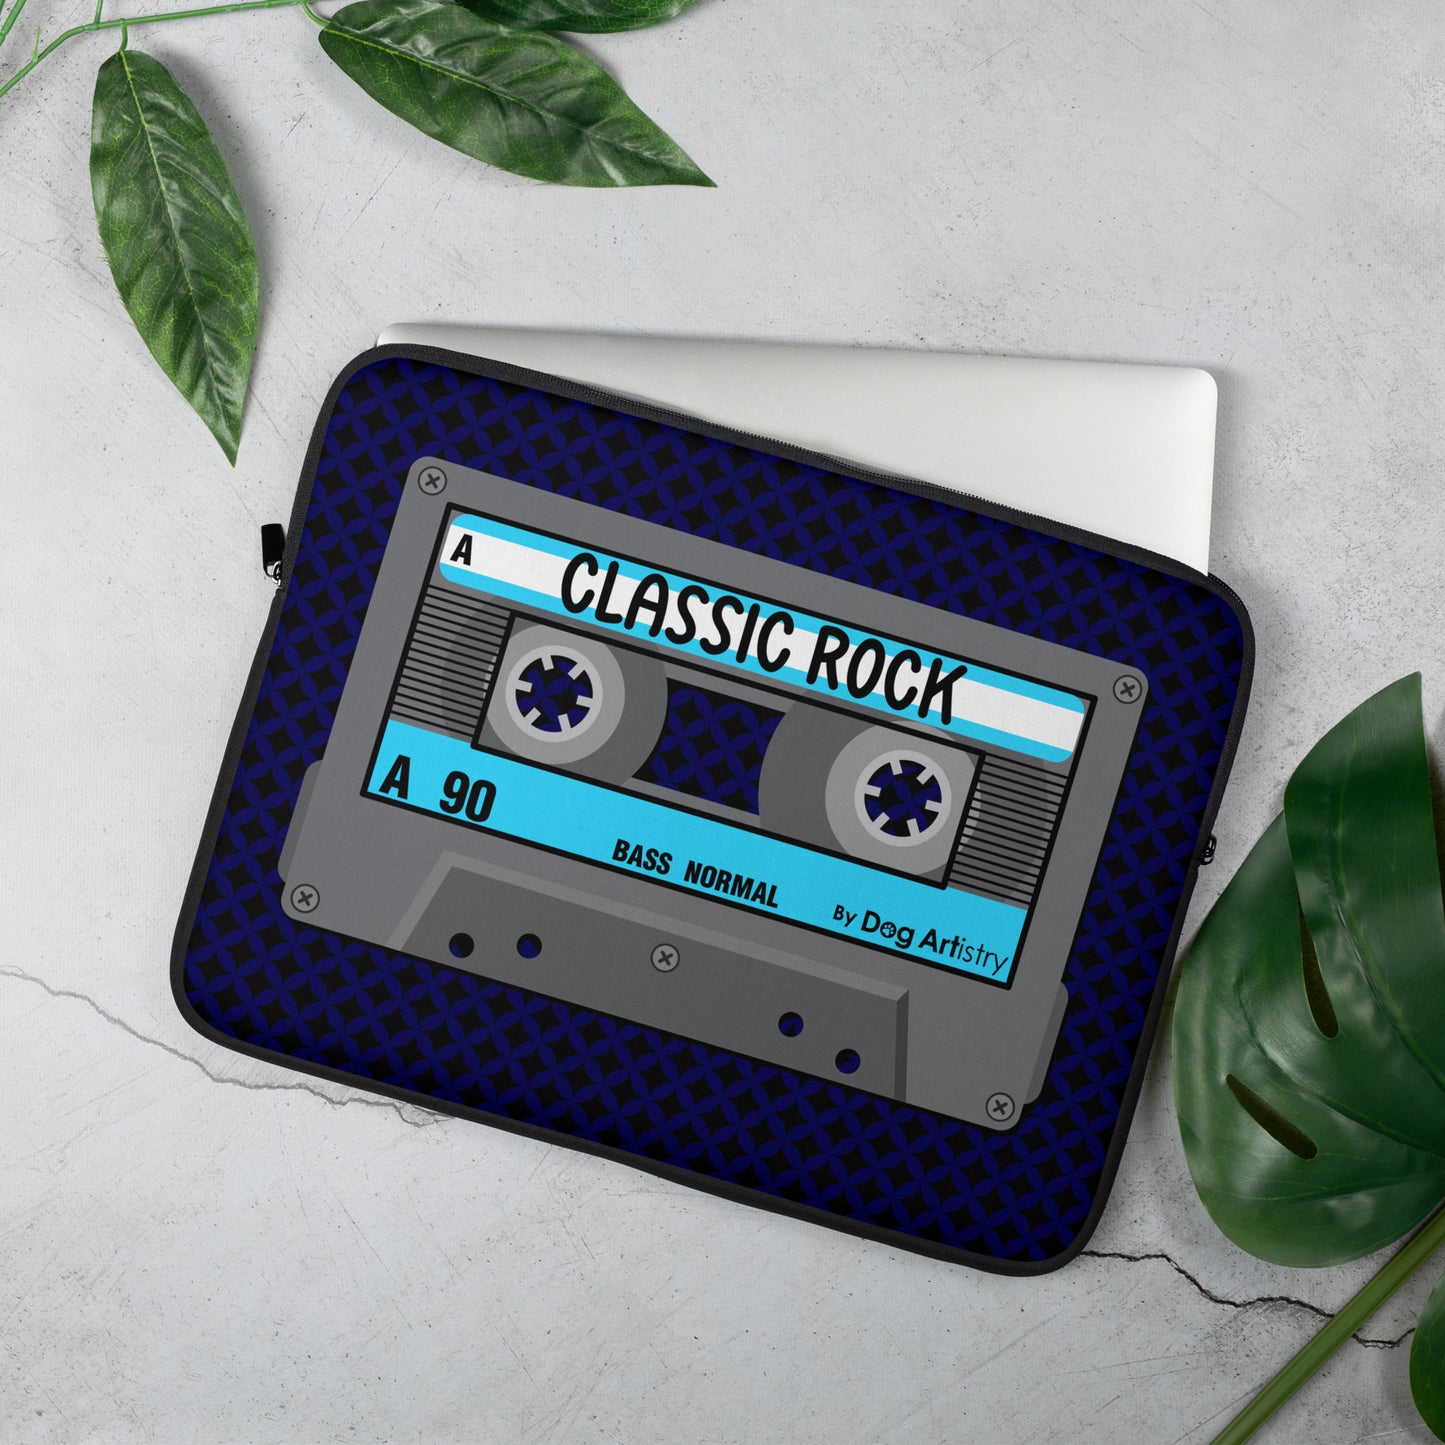 Cassette Tape Classic Rock music laptop sleeve designed by Dog Artistry.